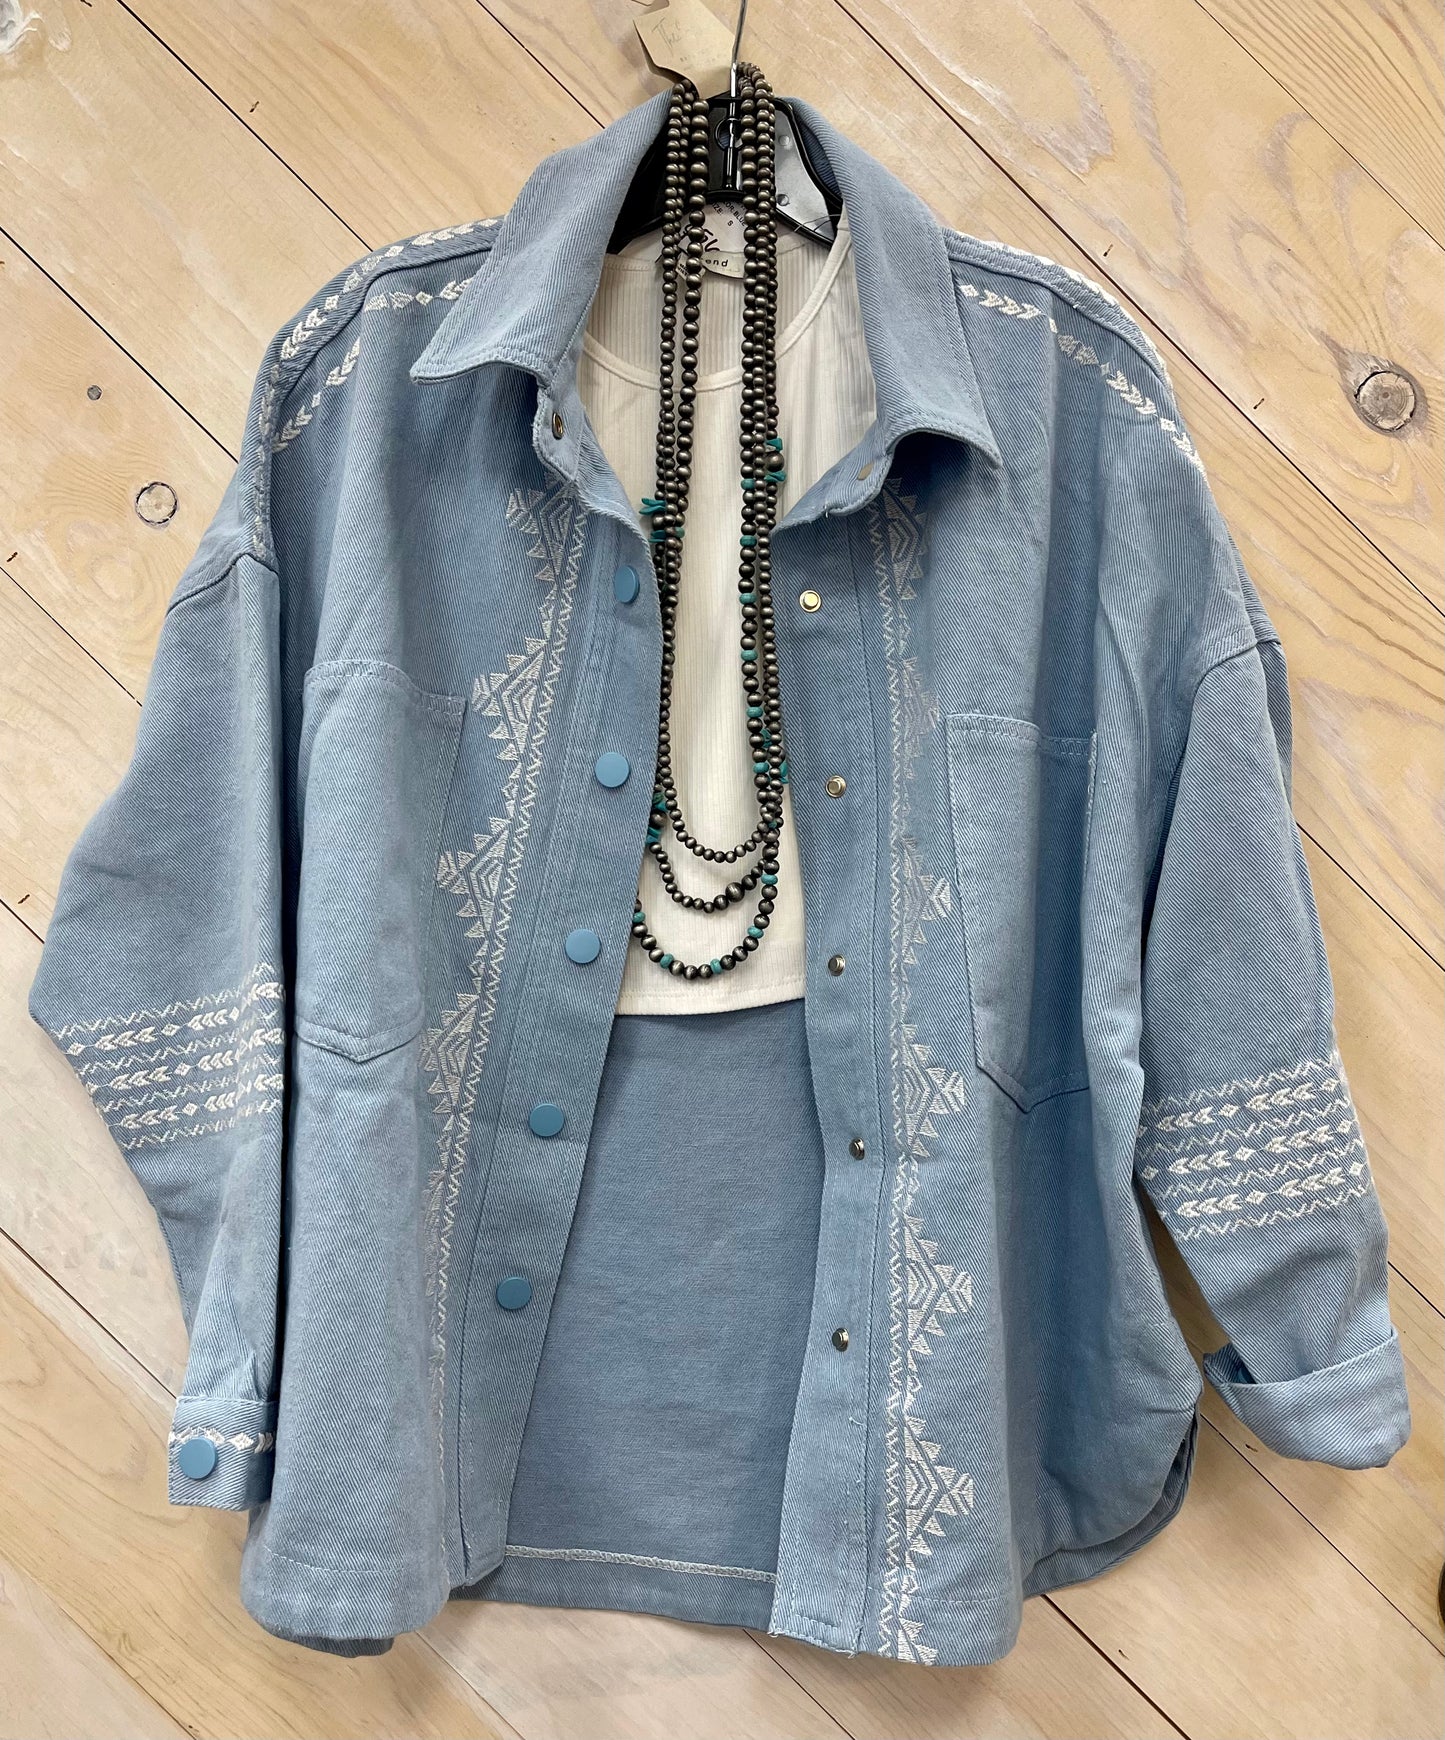 The West is Wild Embroidered Denim Shirt